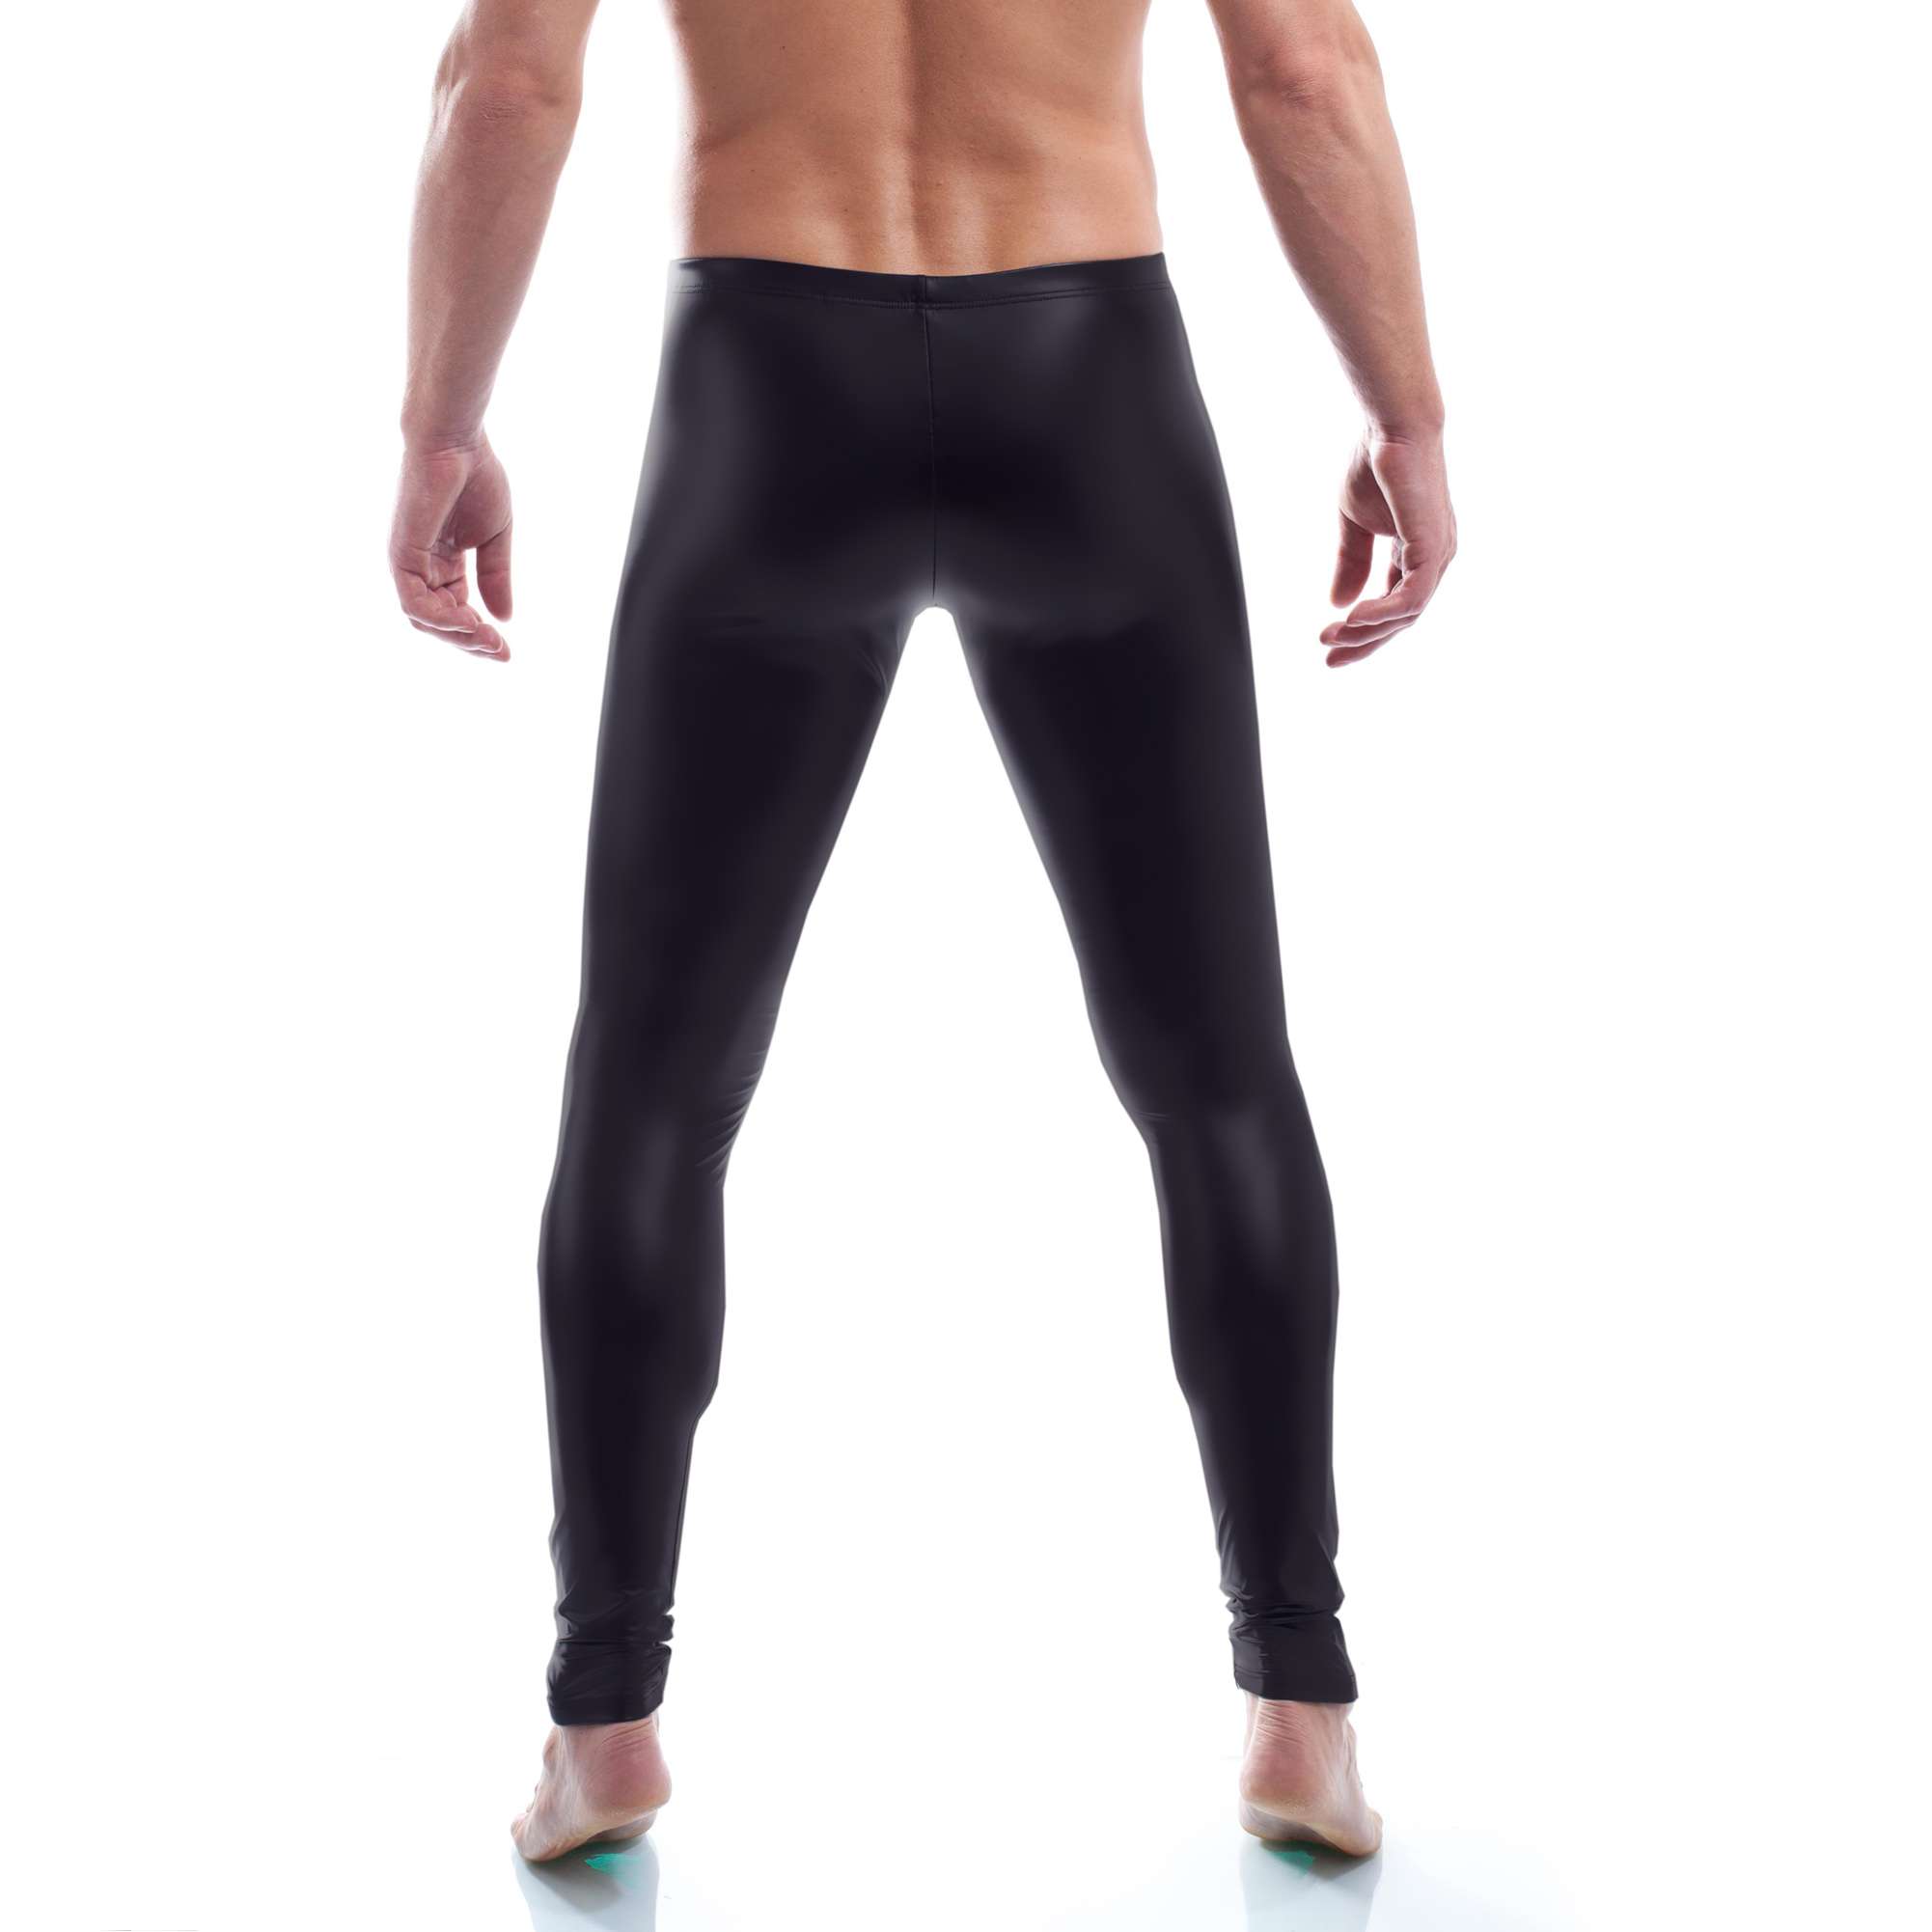 Synlex³ mat swim leggings belongs to the Wojoer LIVE-products. And will be produced on demand.
Sizes
S, M, L, XL, XXL, XXXL
Material
Synlex³: 53% polyamide |6% spandex | 41% polyurethane

Badedeulxe edging: 80% polyamide | 20% spandex
Specials
LIVE Product | stretchy material | skinny |…